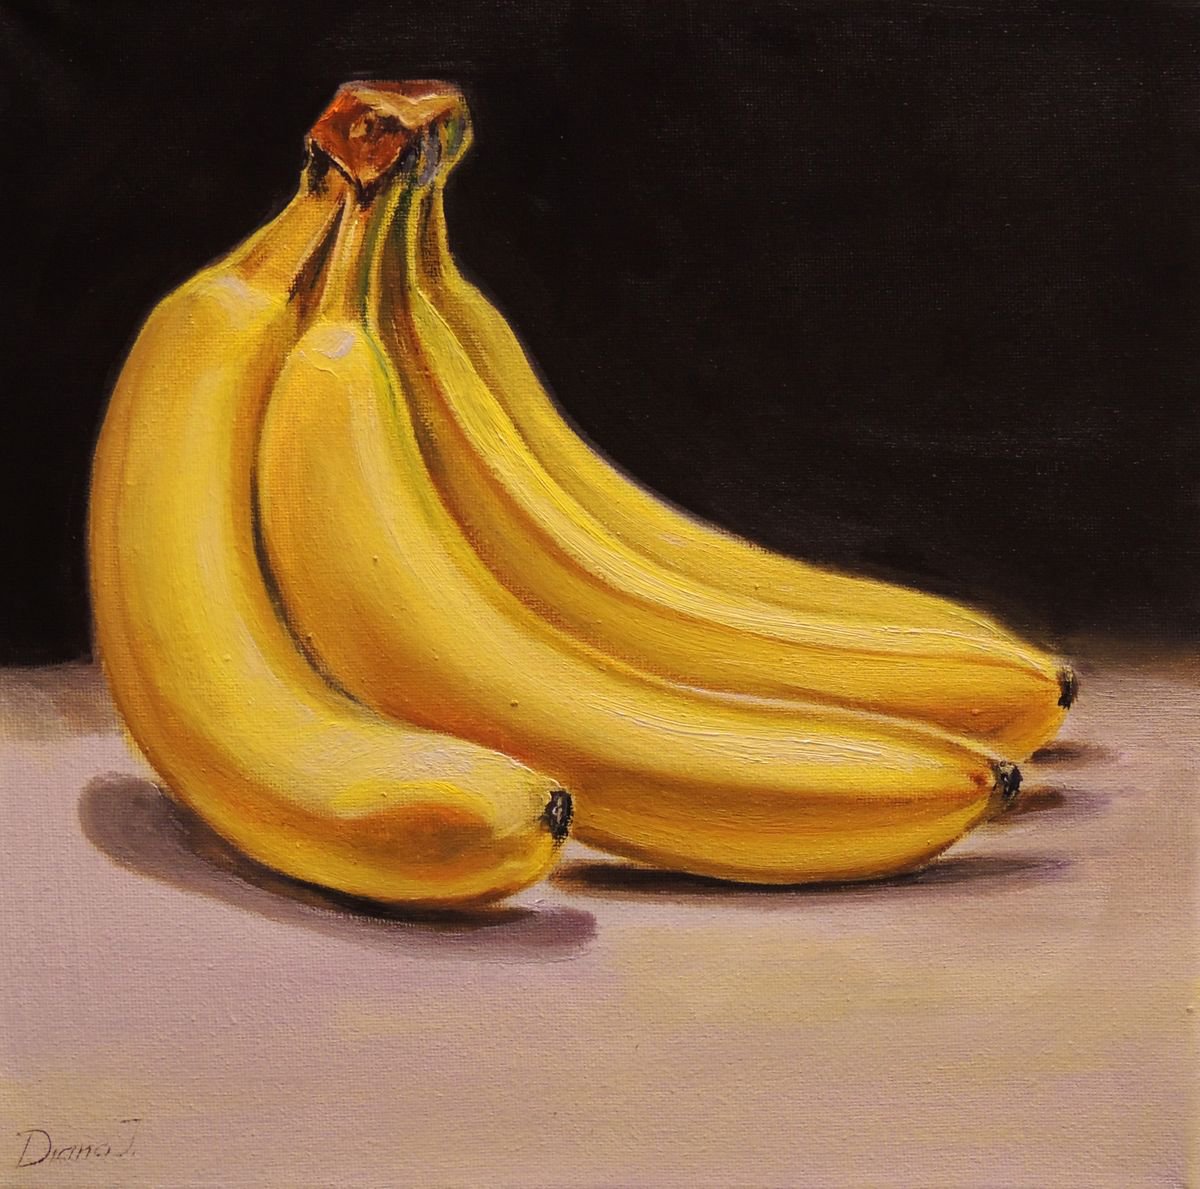 A Hand of Bananas by Diana Janson